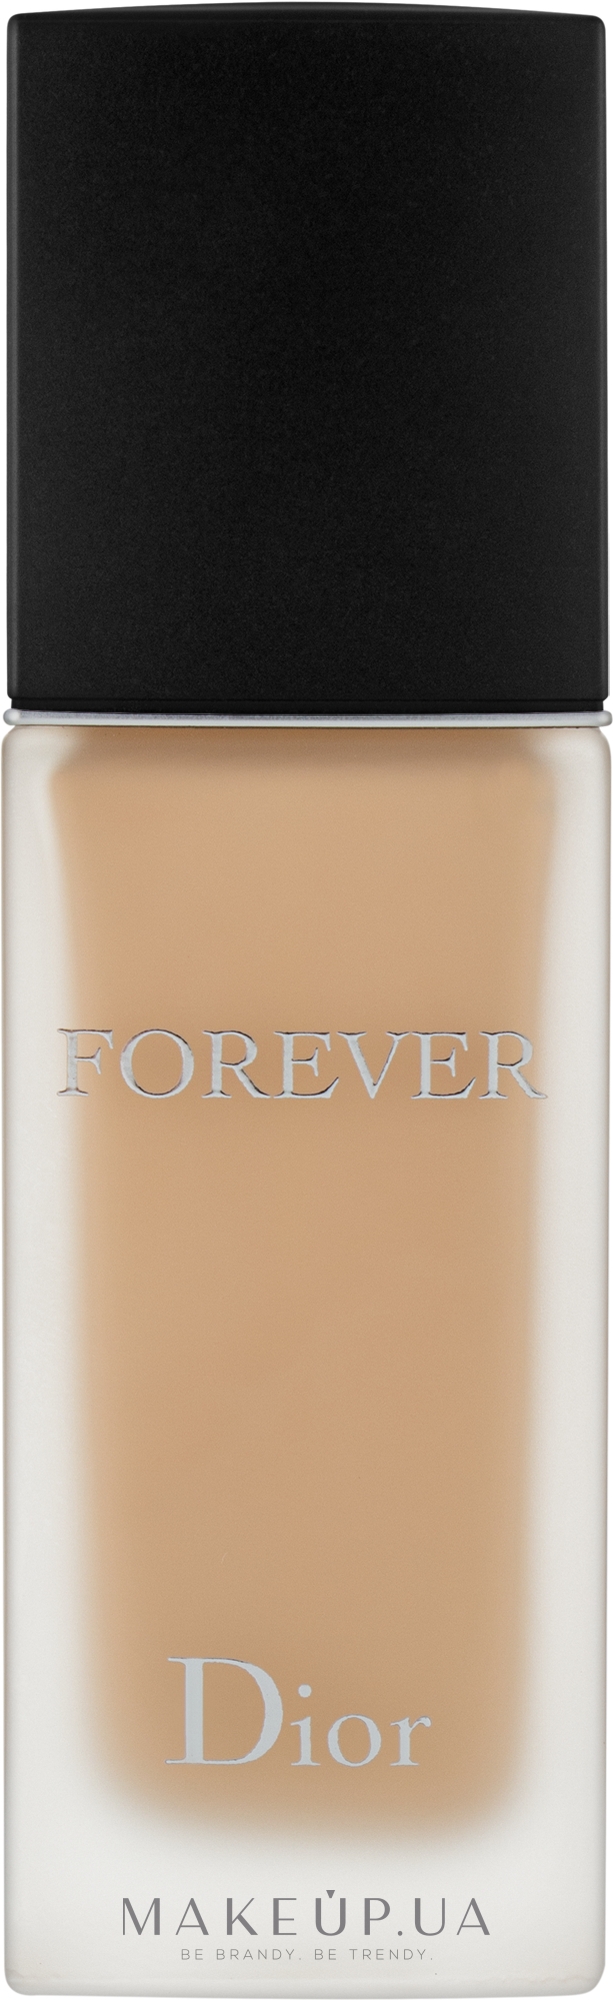 Dior Forever Clean Matte High Perfection 24 H Foundation SPF 20 PA+++